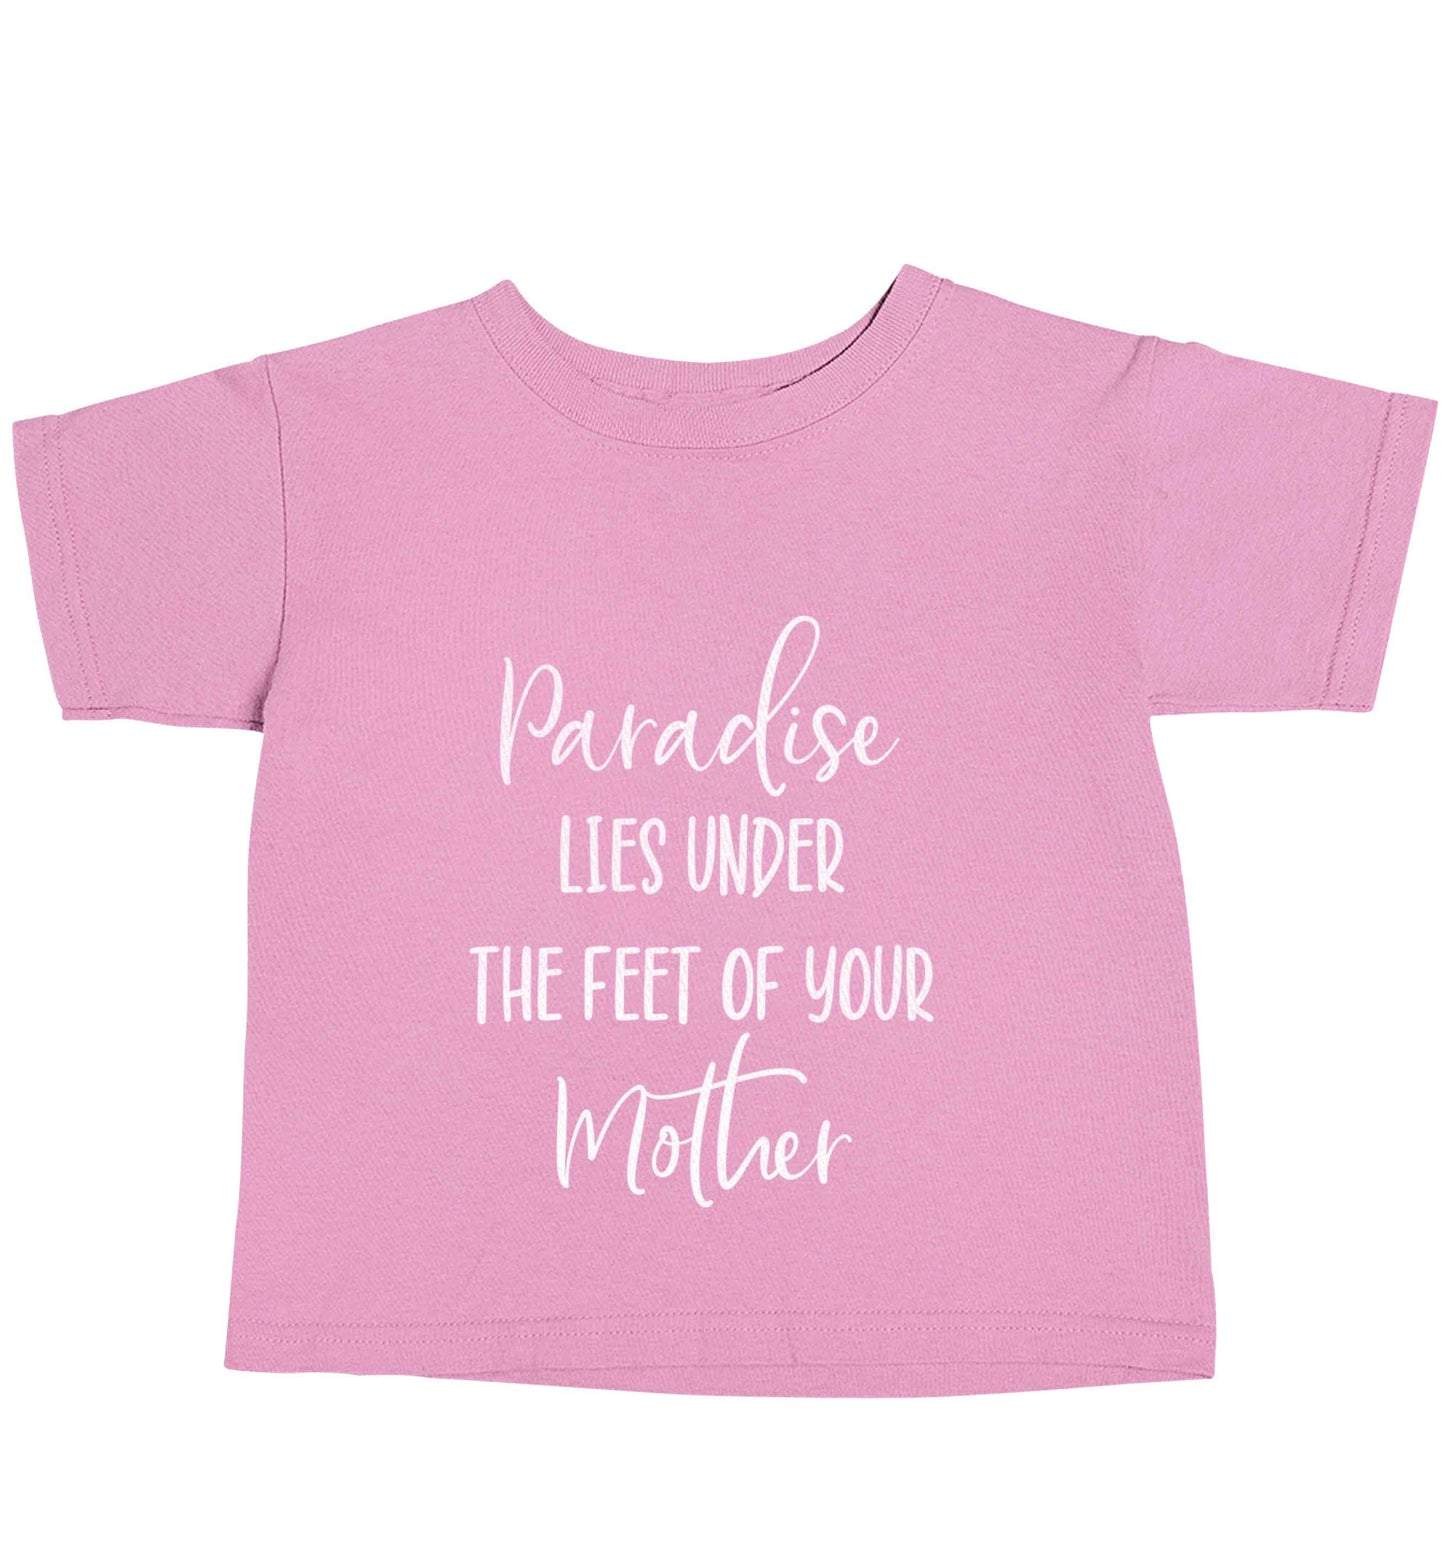 Paradise lies under the feet of your mother light pink baby toddler Tshirt 2 Years